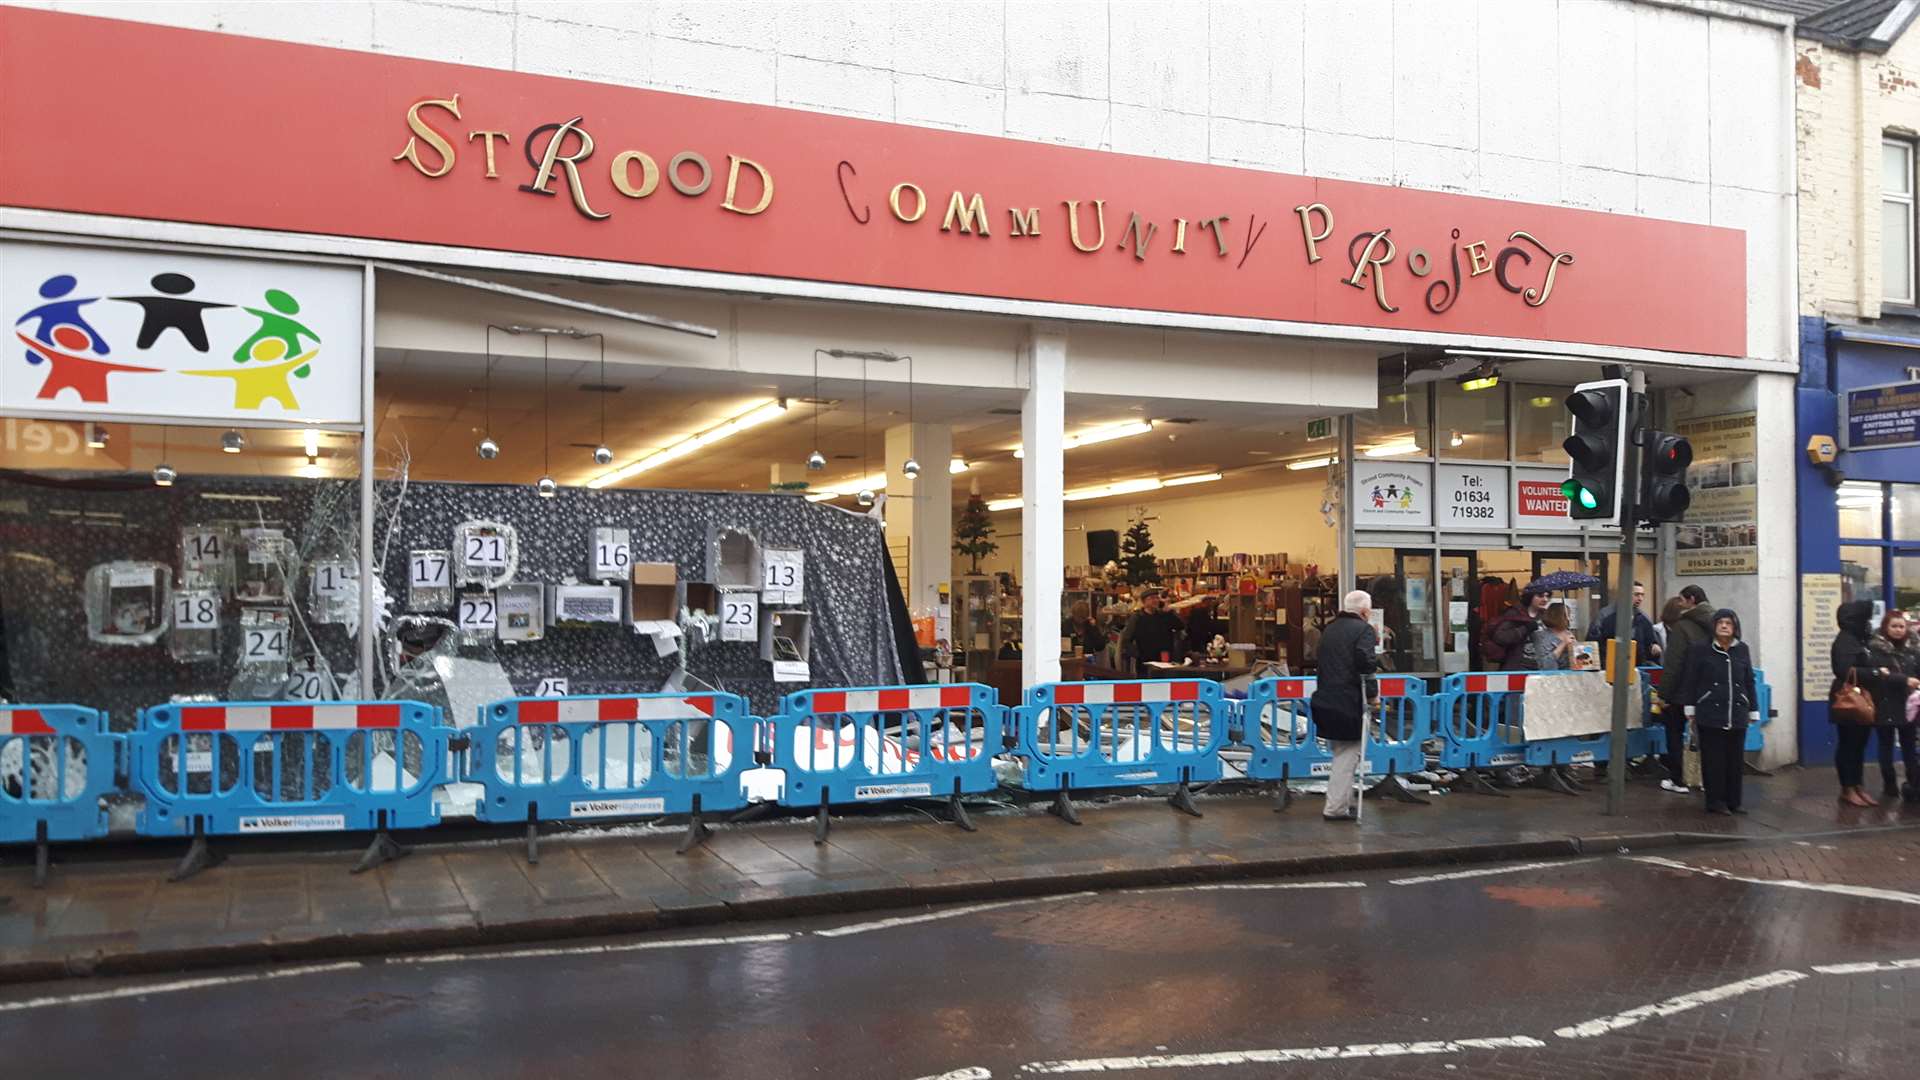 A driver was arrested after crashing into the front of Strood Community Project Shop